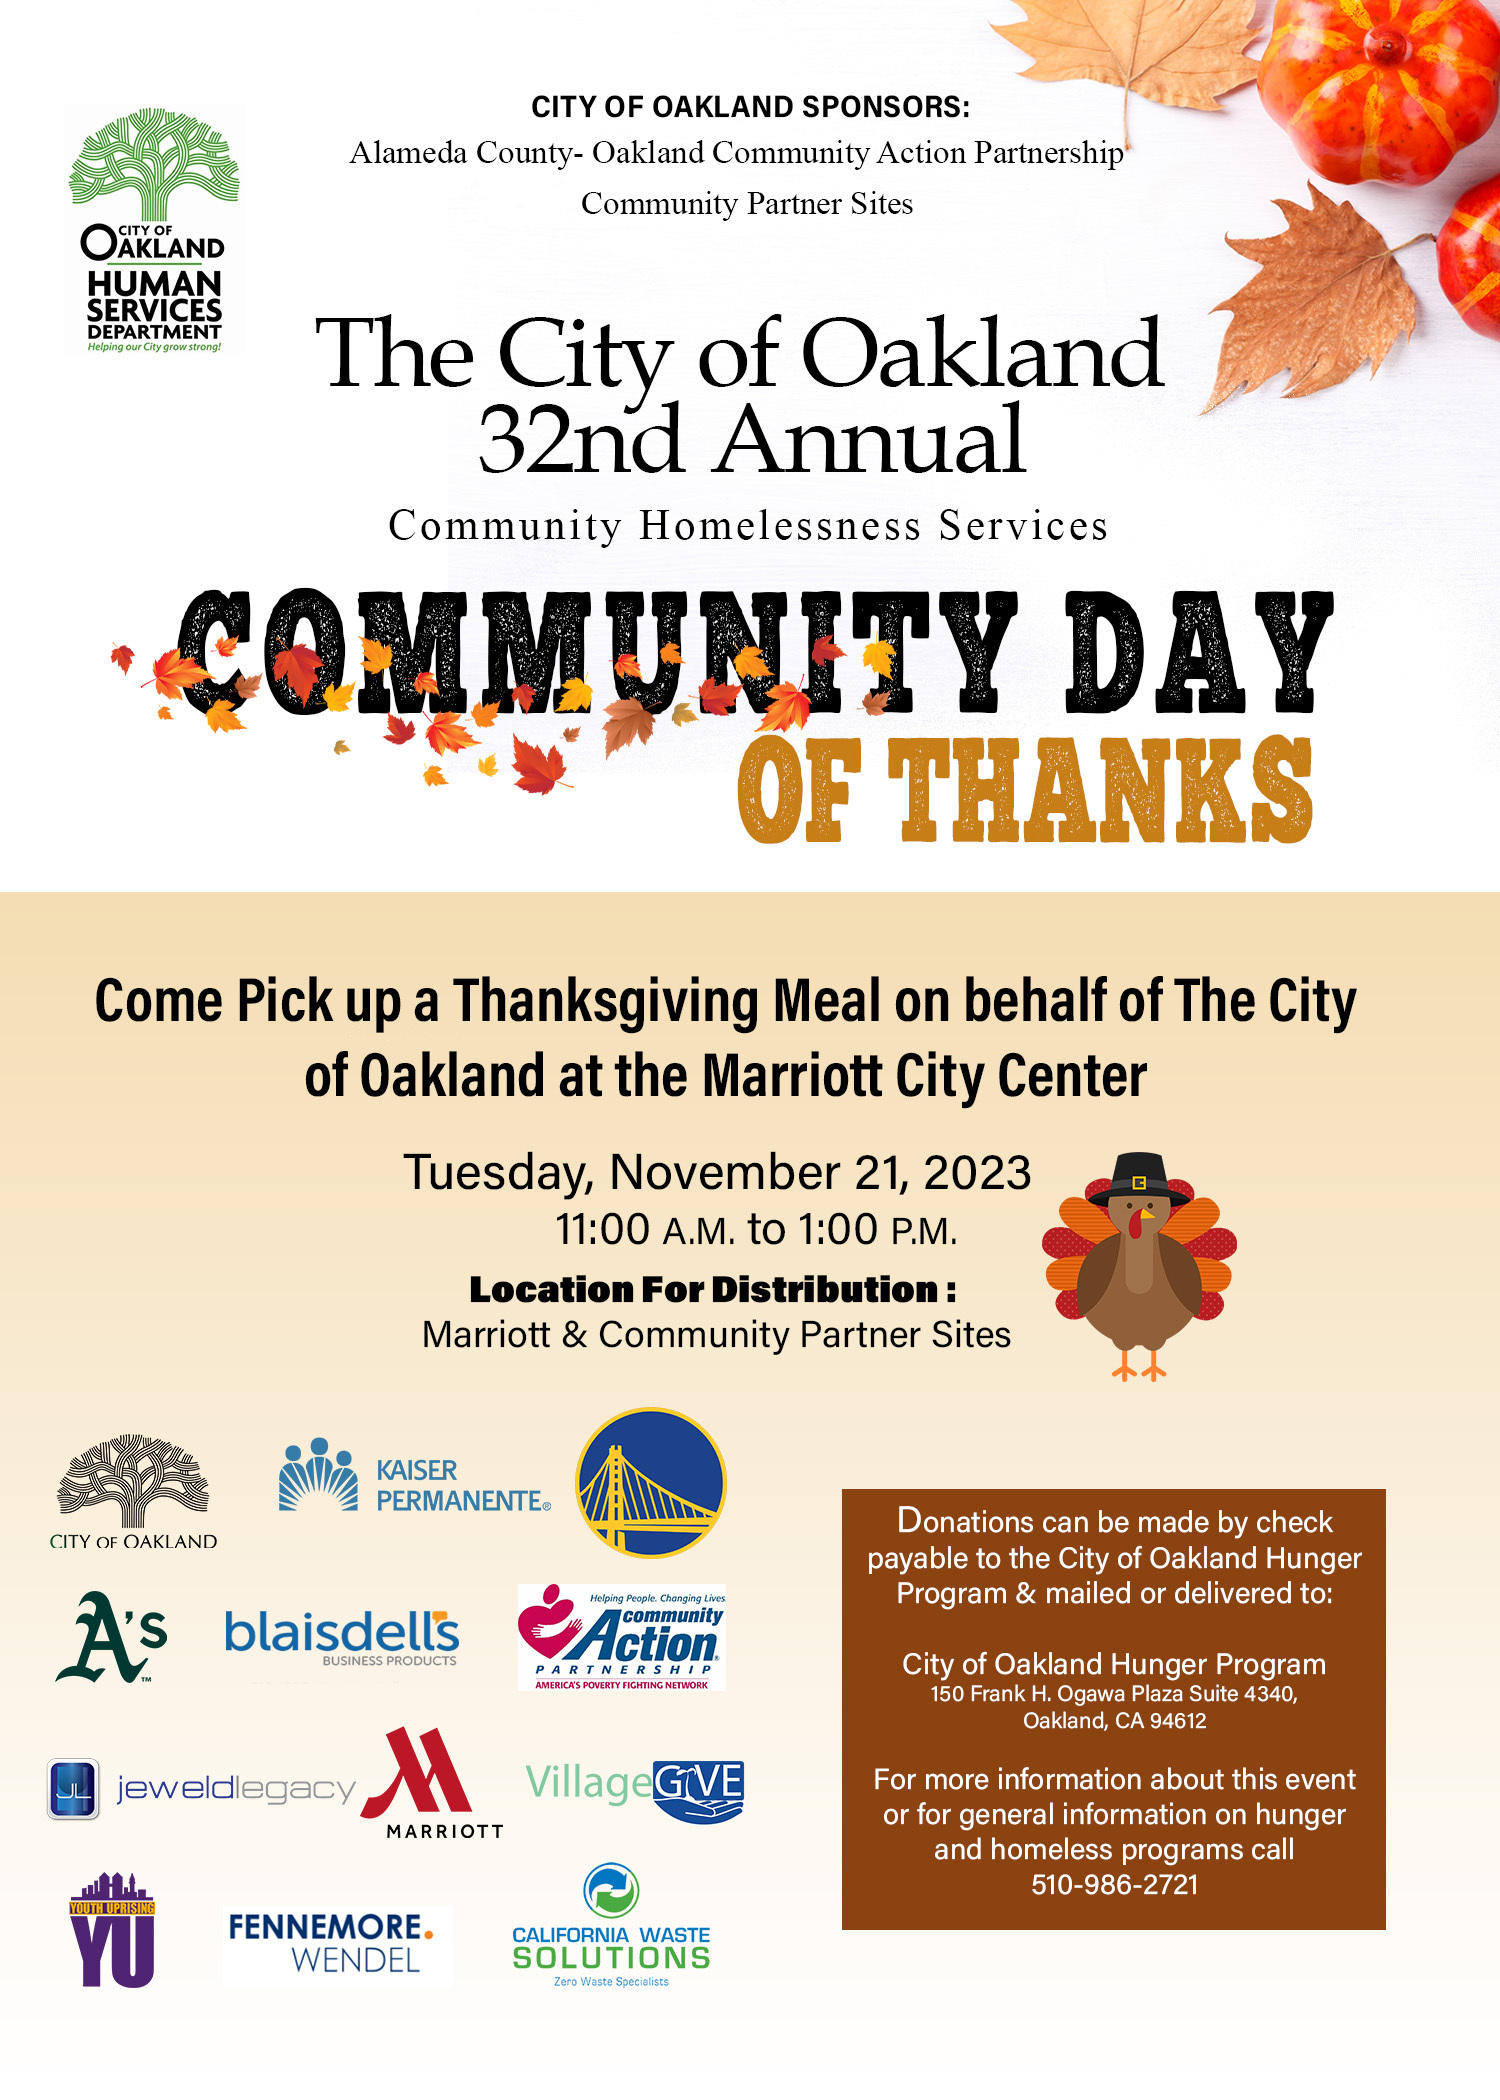 Flyer for 32nd annual Community Day of Thanks held at Oakland Marriott City Center from 11AM-1PM